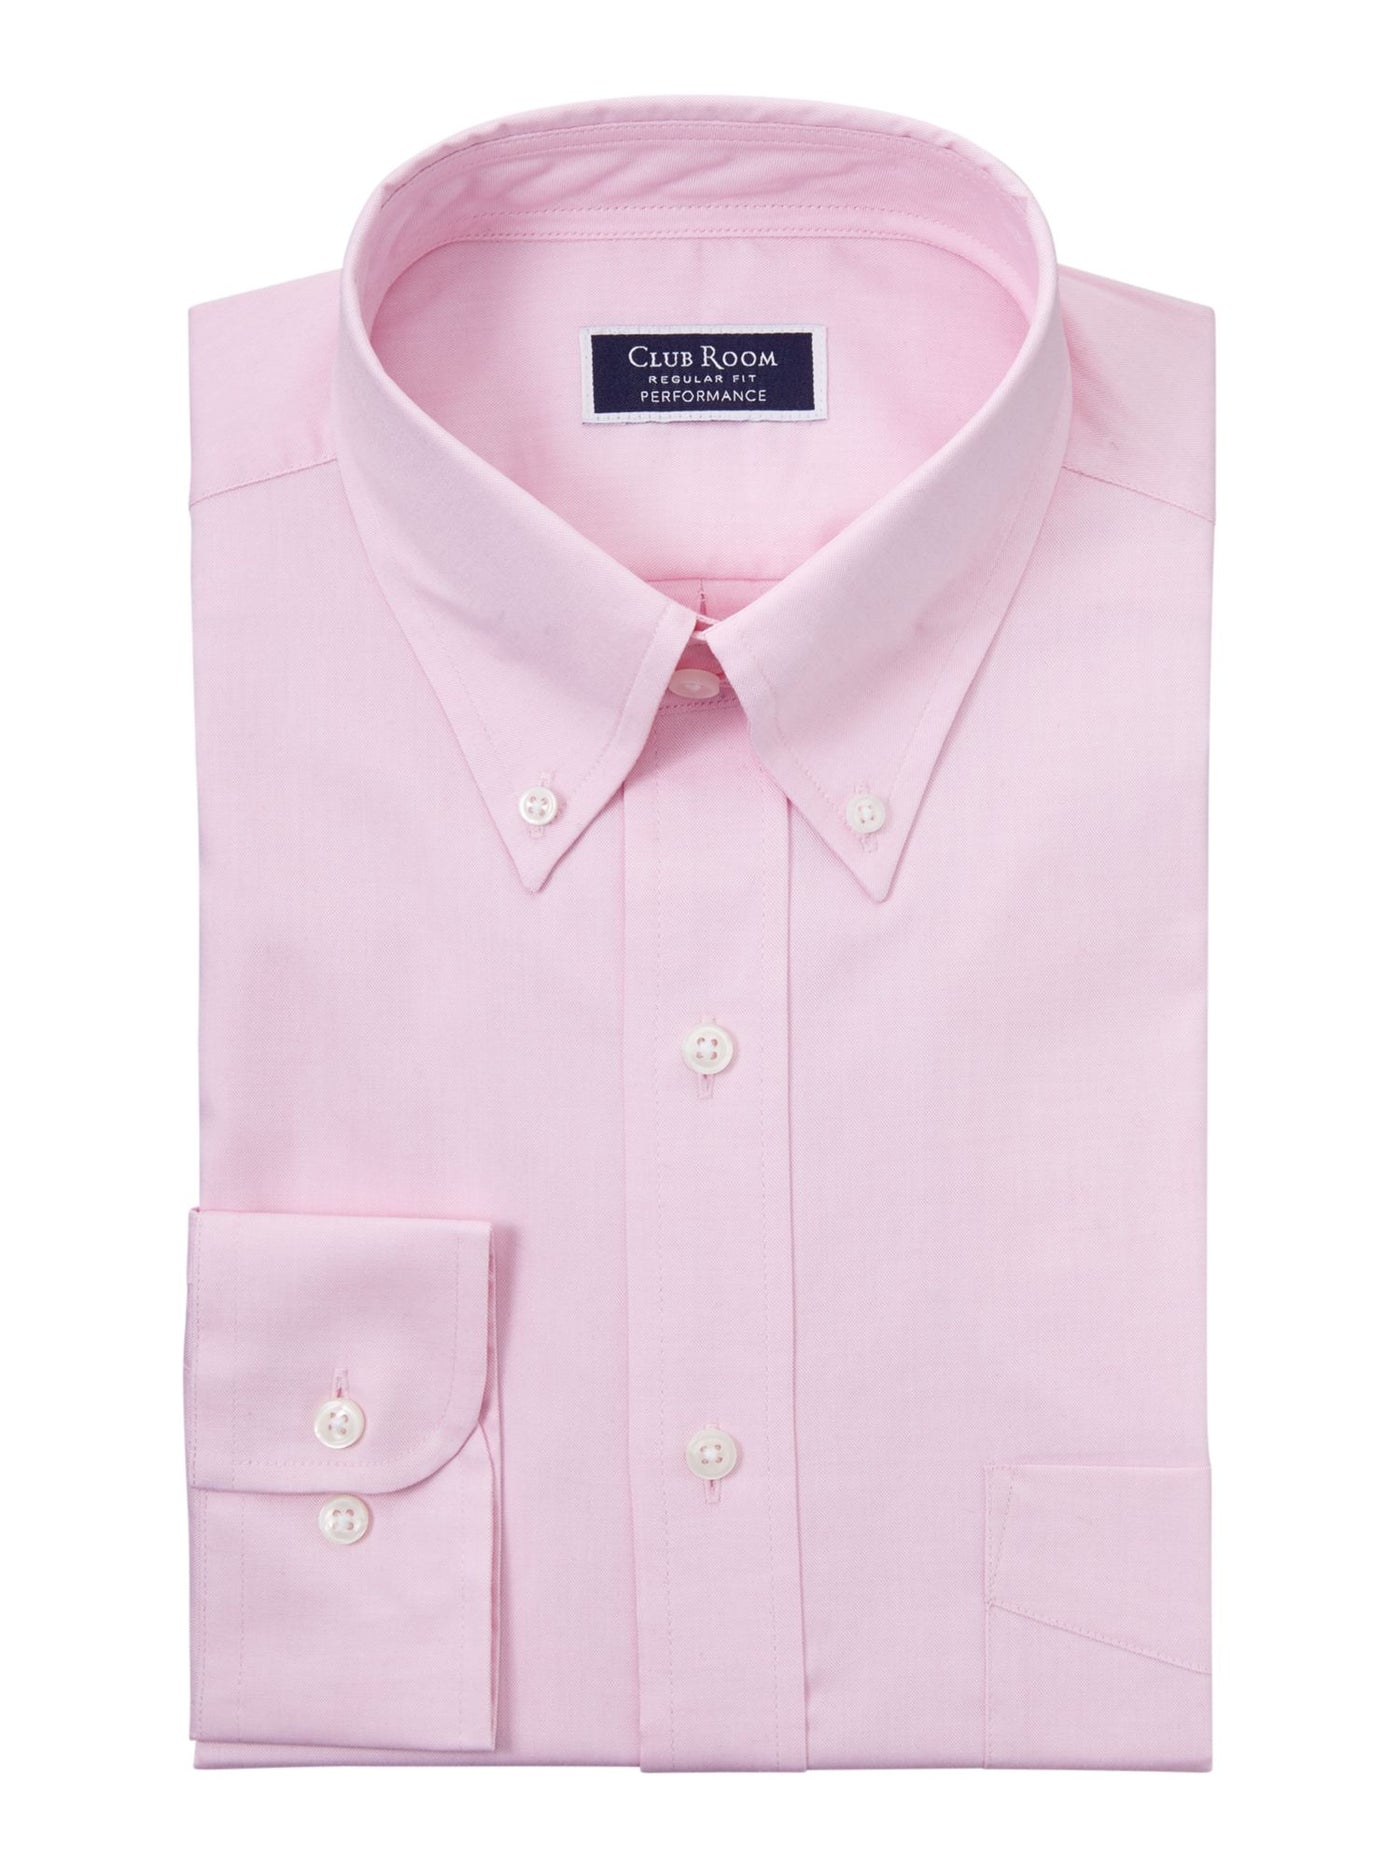 CLUBROOM Mens Pink Collared Classic Fit Performance Stretch Dress Shirt 16- 34/35